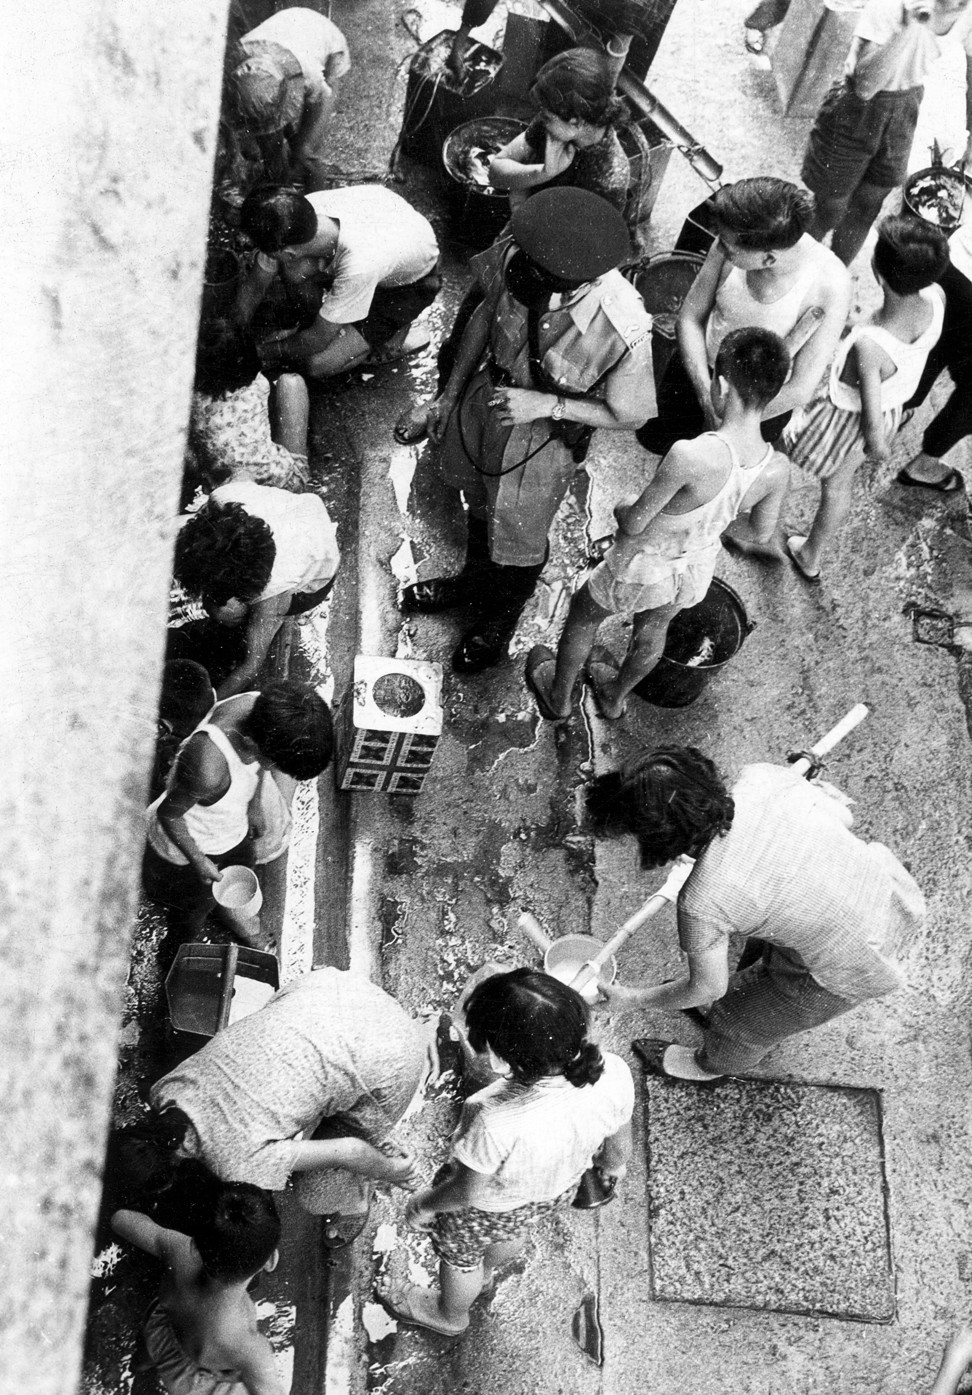 Residents collect water at Po Hing Fong in Sheung Wan, during a drought in June 1963. Photo: SCMP